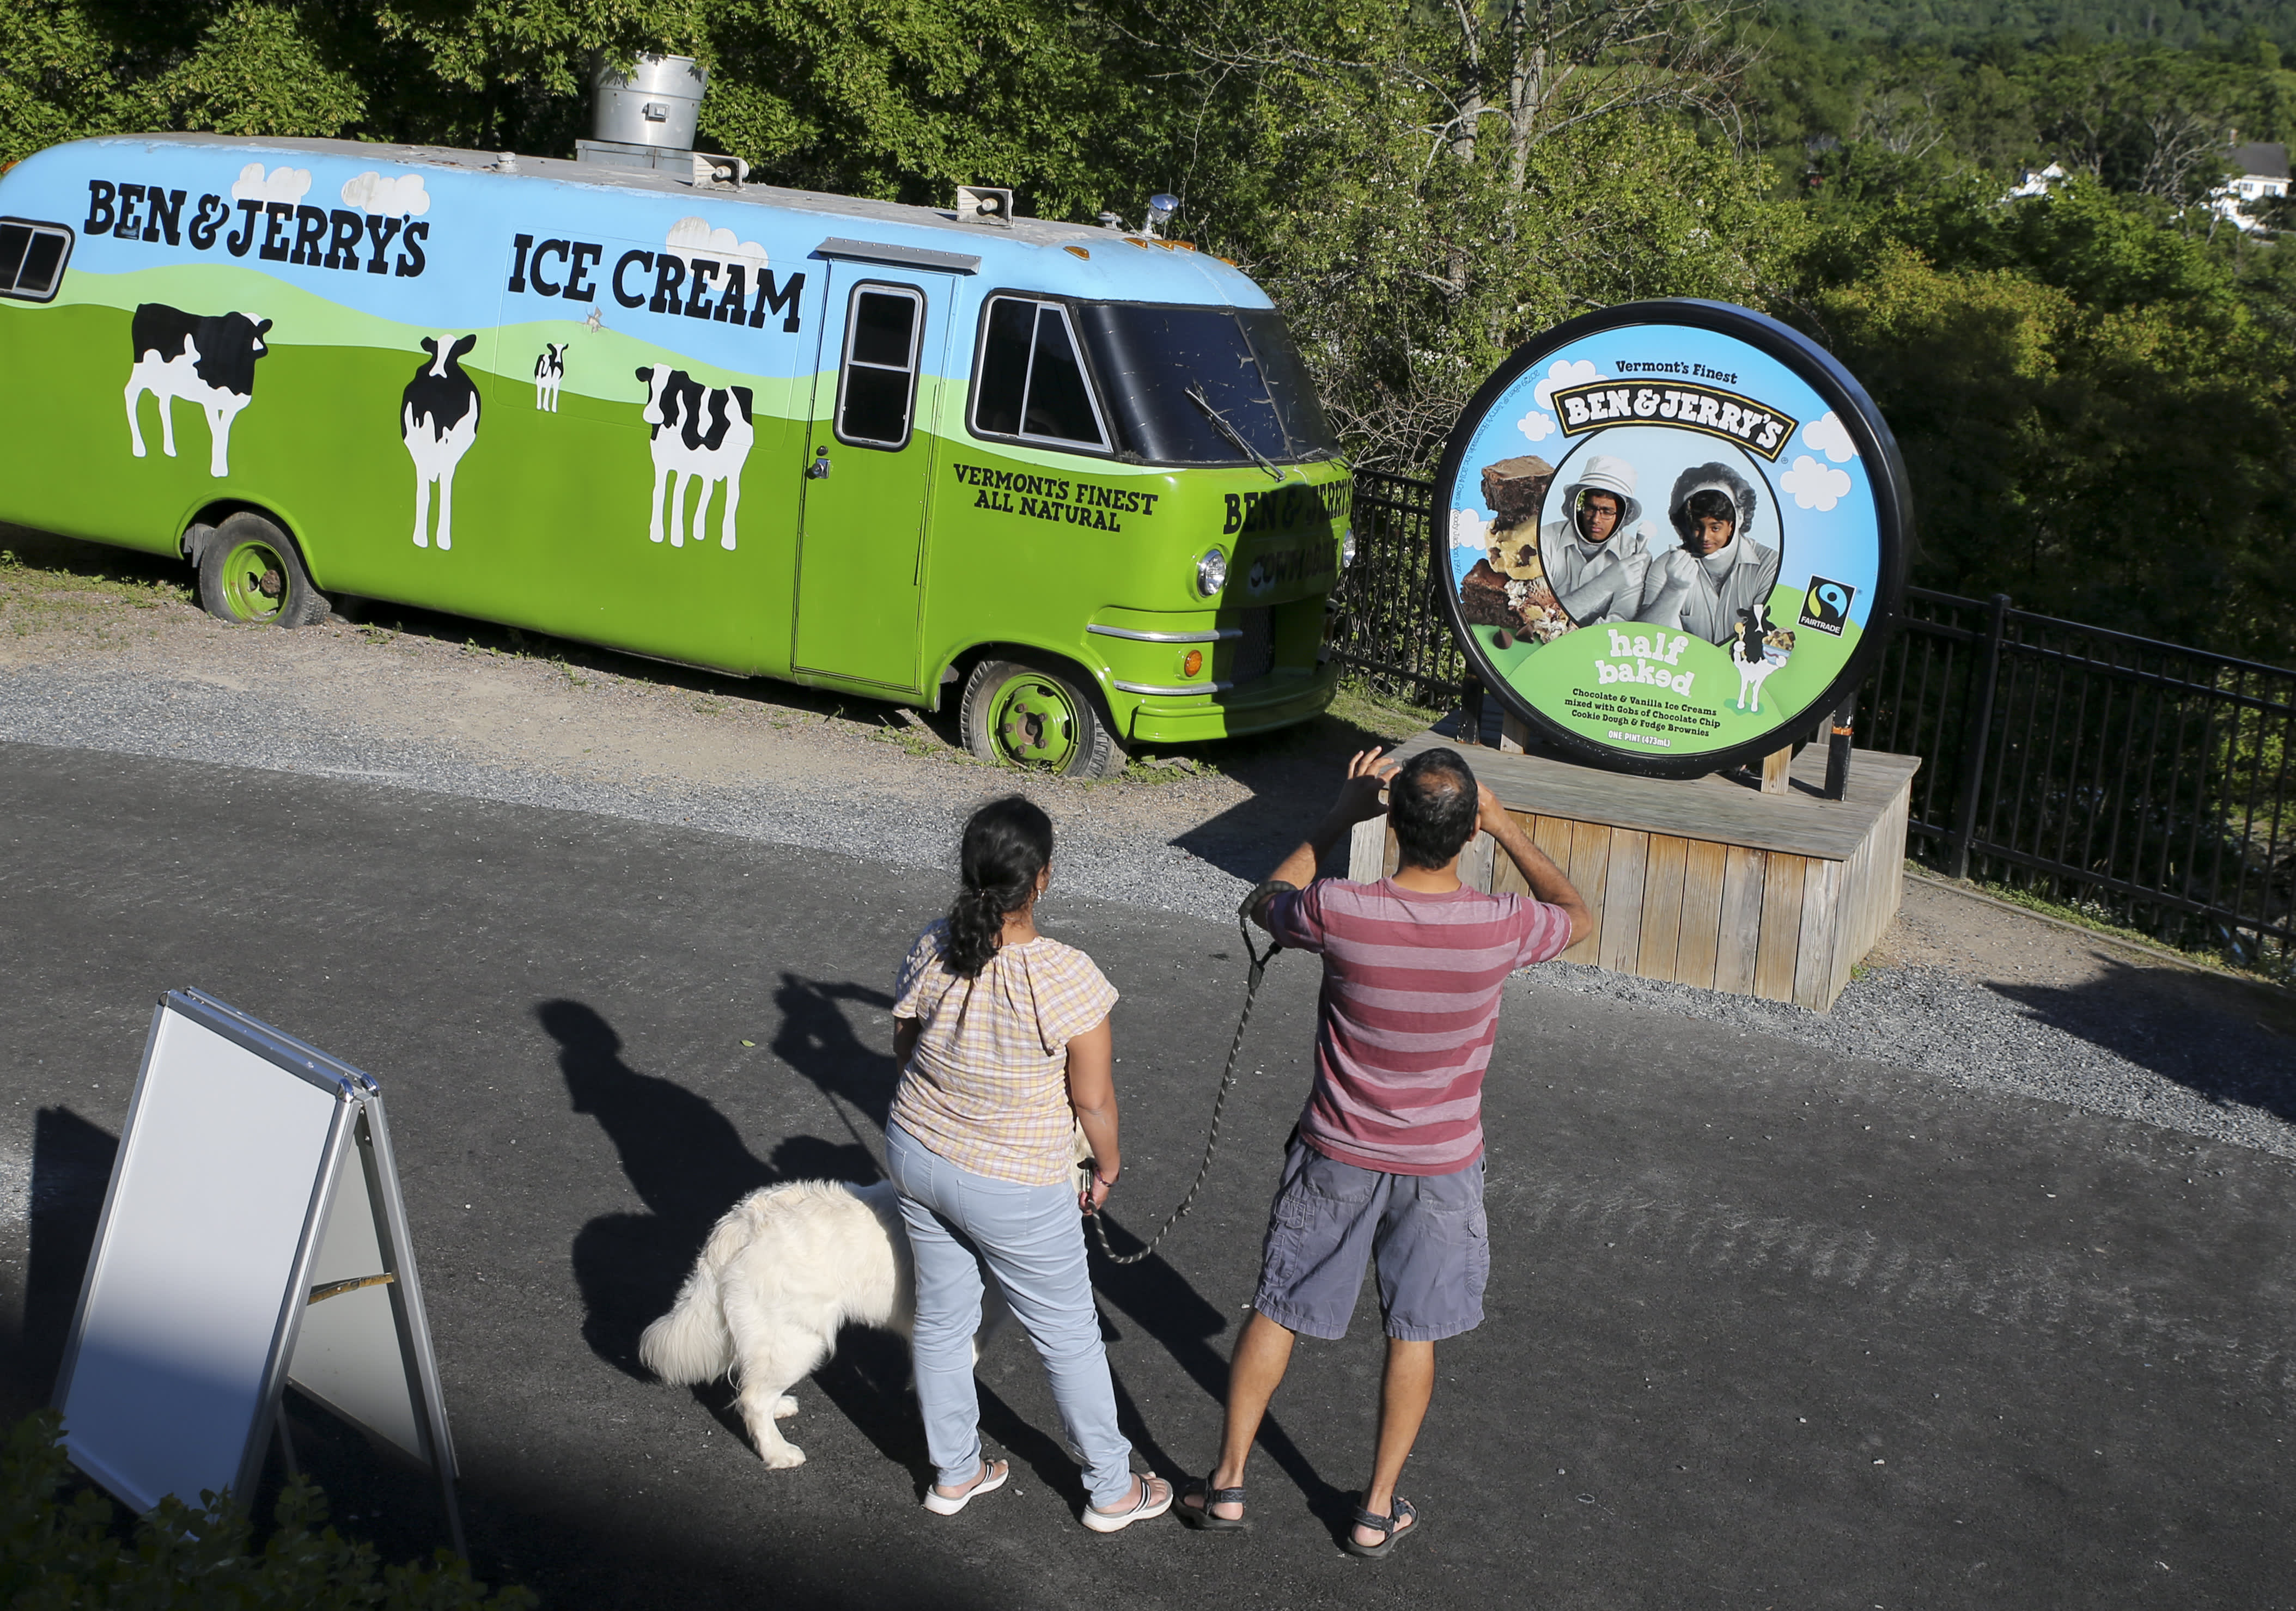 Israel vows to ‘act aggressively’ against Ben & Jerry’s